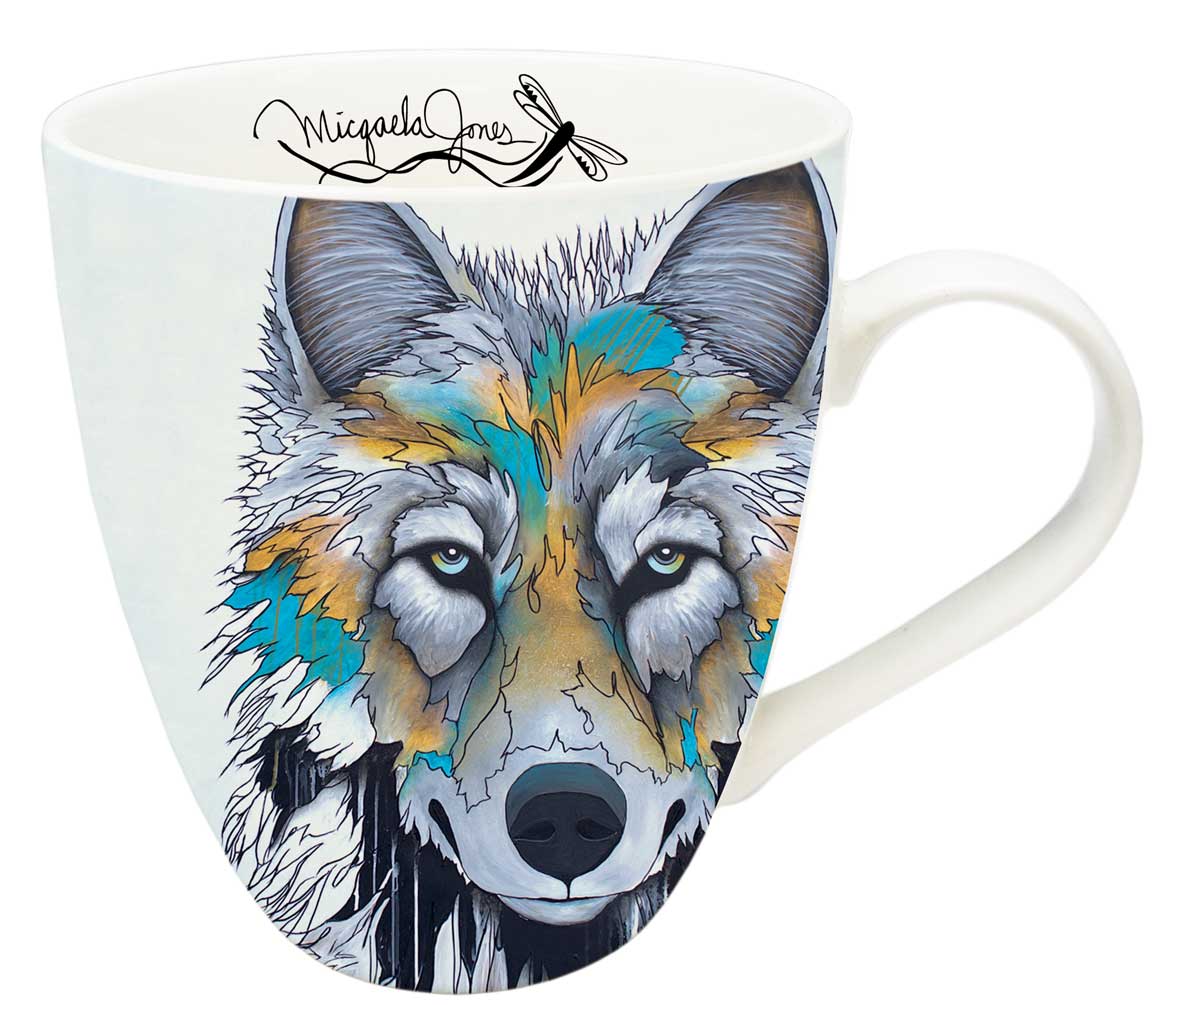 Mug Micqaela Jones Alpha - Mug Micqaela Jones Alpha -  - House of Himwitsa Native Art Gallery and Gifts